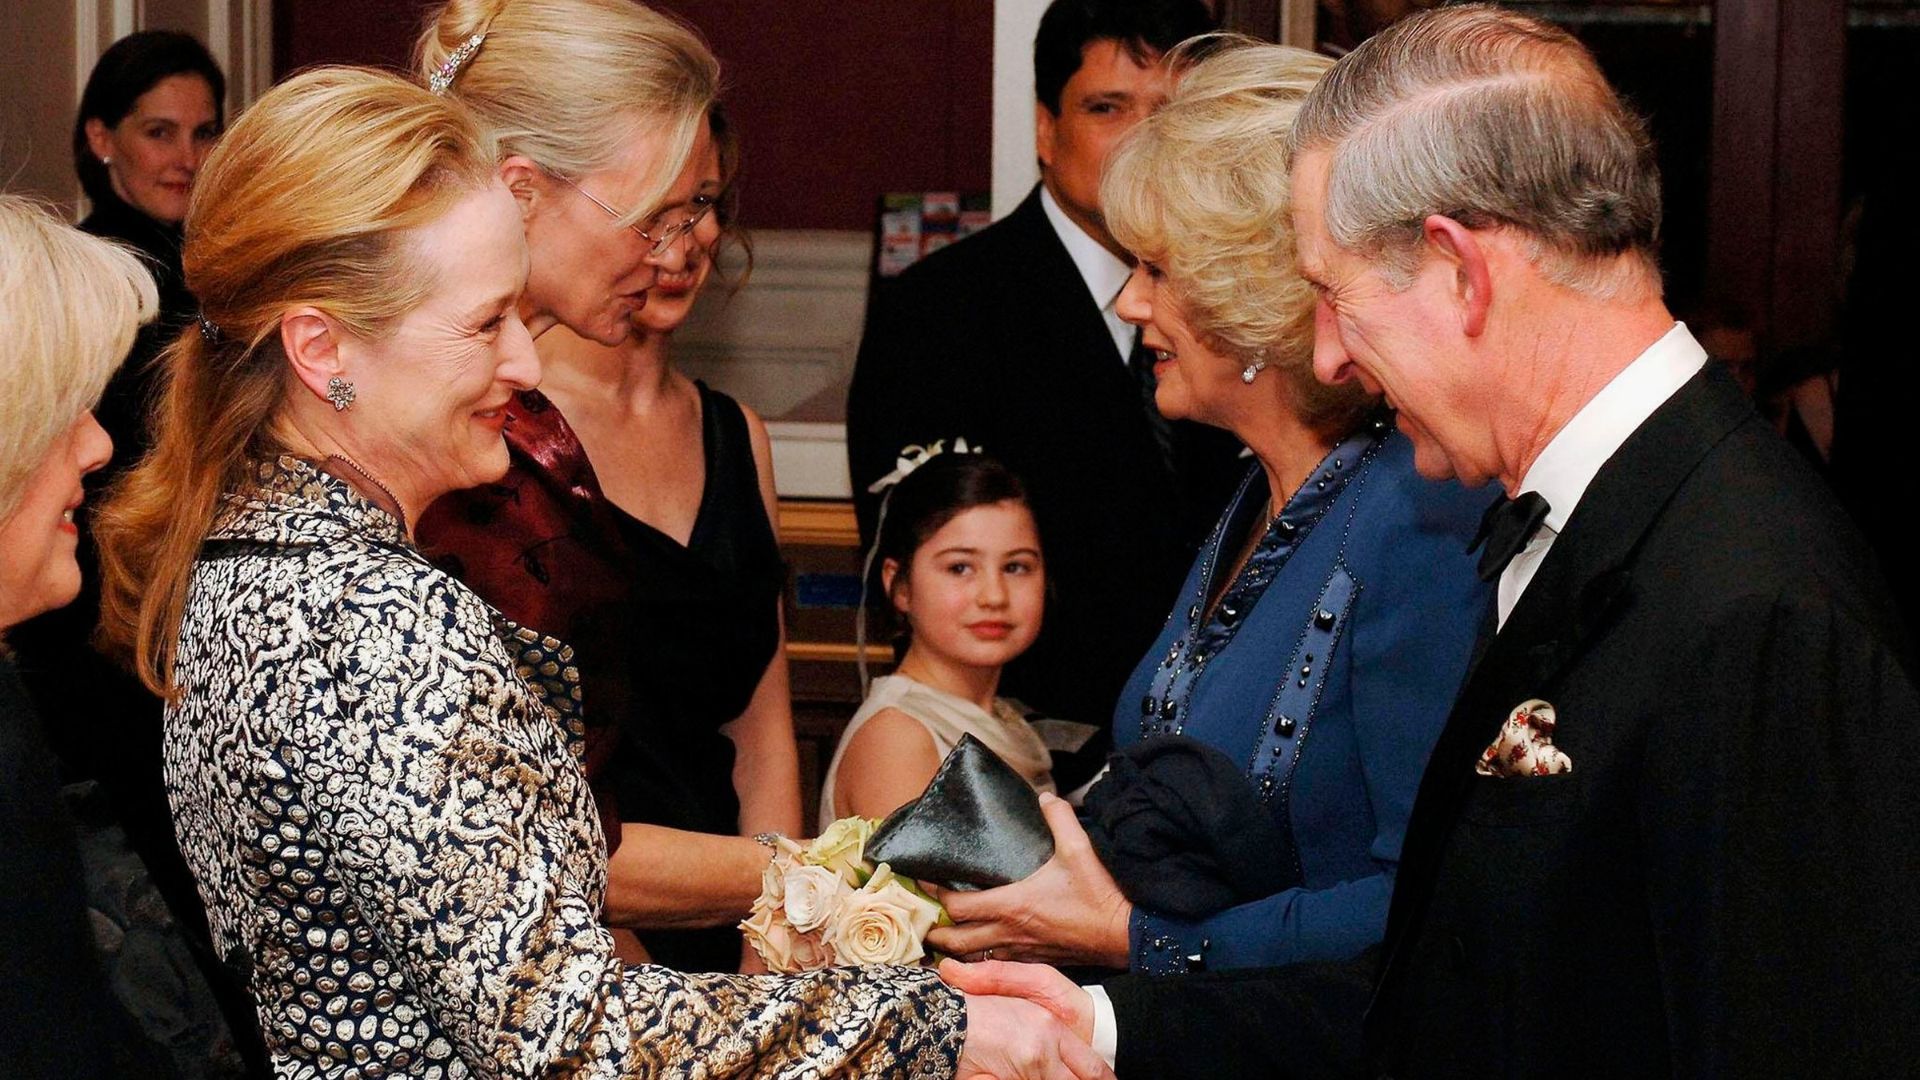 <p>                     In 2007, during a trip to the US East Coast, Prince Charles received the Global Environment Citizen Award from the Center for Health and the Global Environment at Harvard Medical School. The event was truly star-studded with Duchess Camilla meeting Meryl Streep and complimenting her performance in <em>The Devil Wears Prada</em>.                   </p>